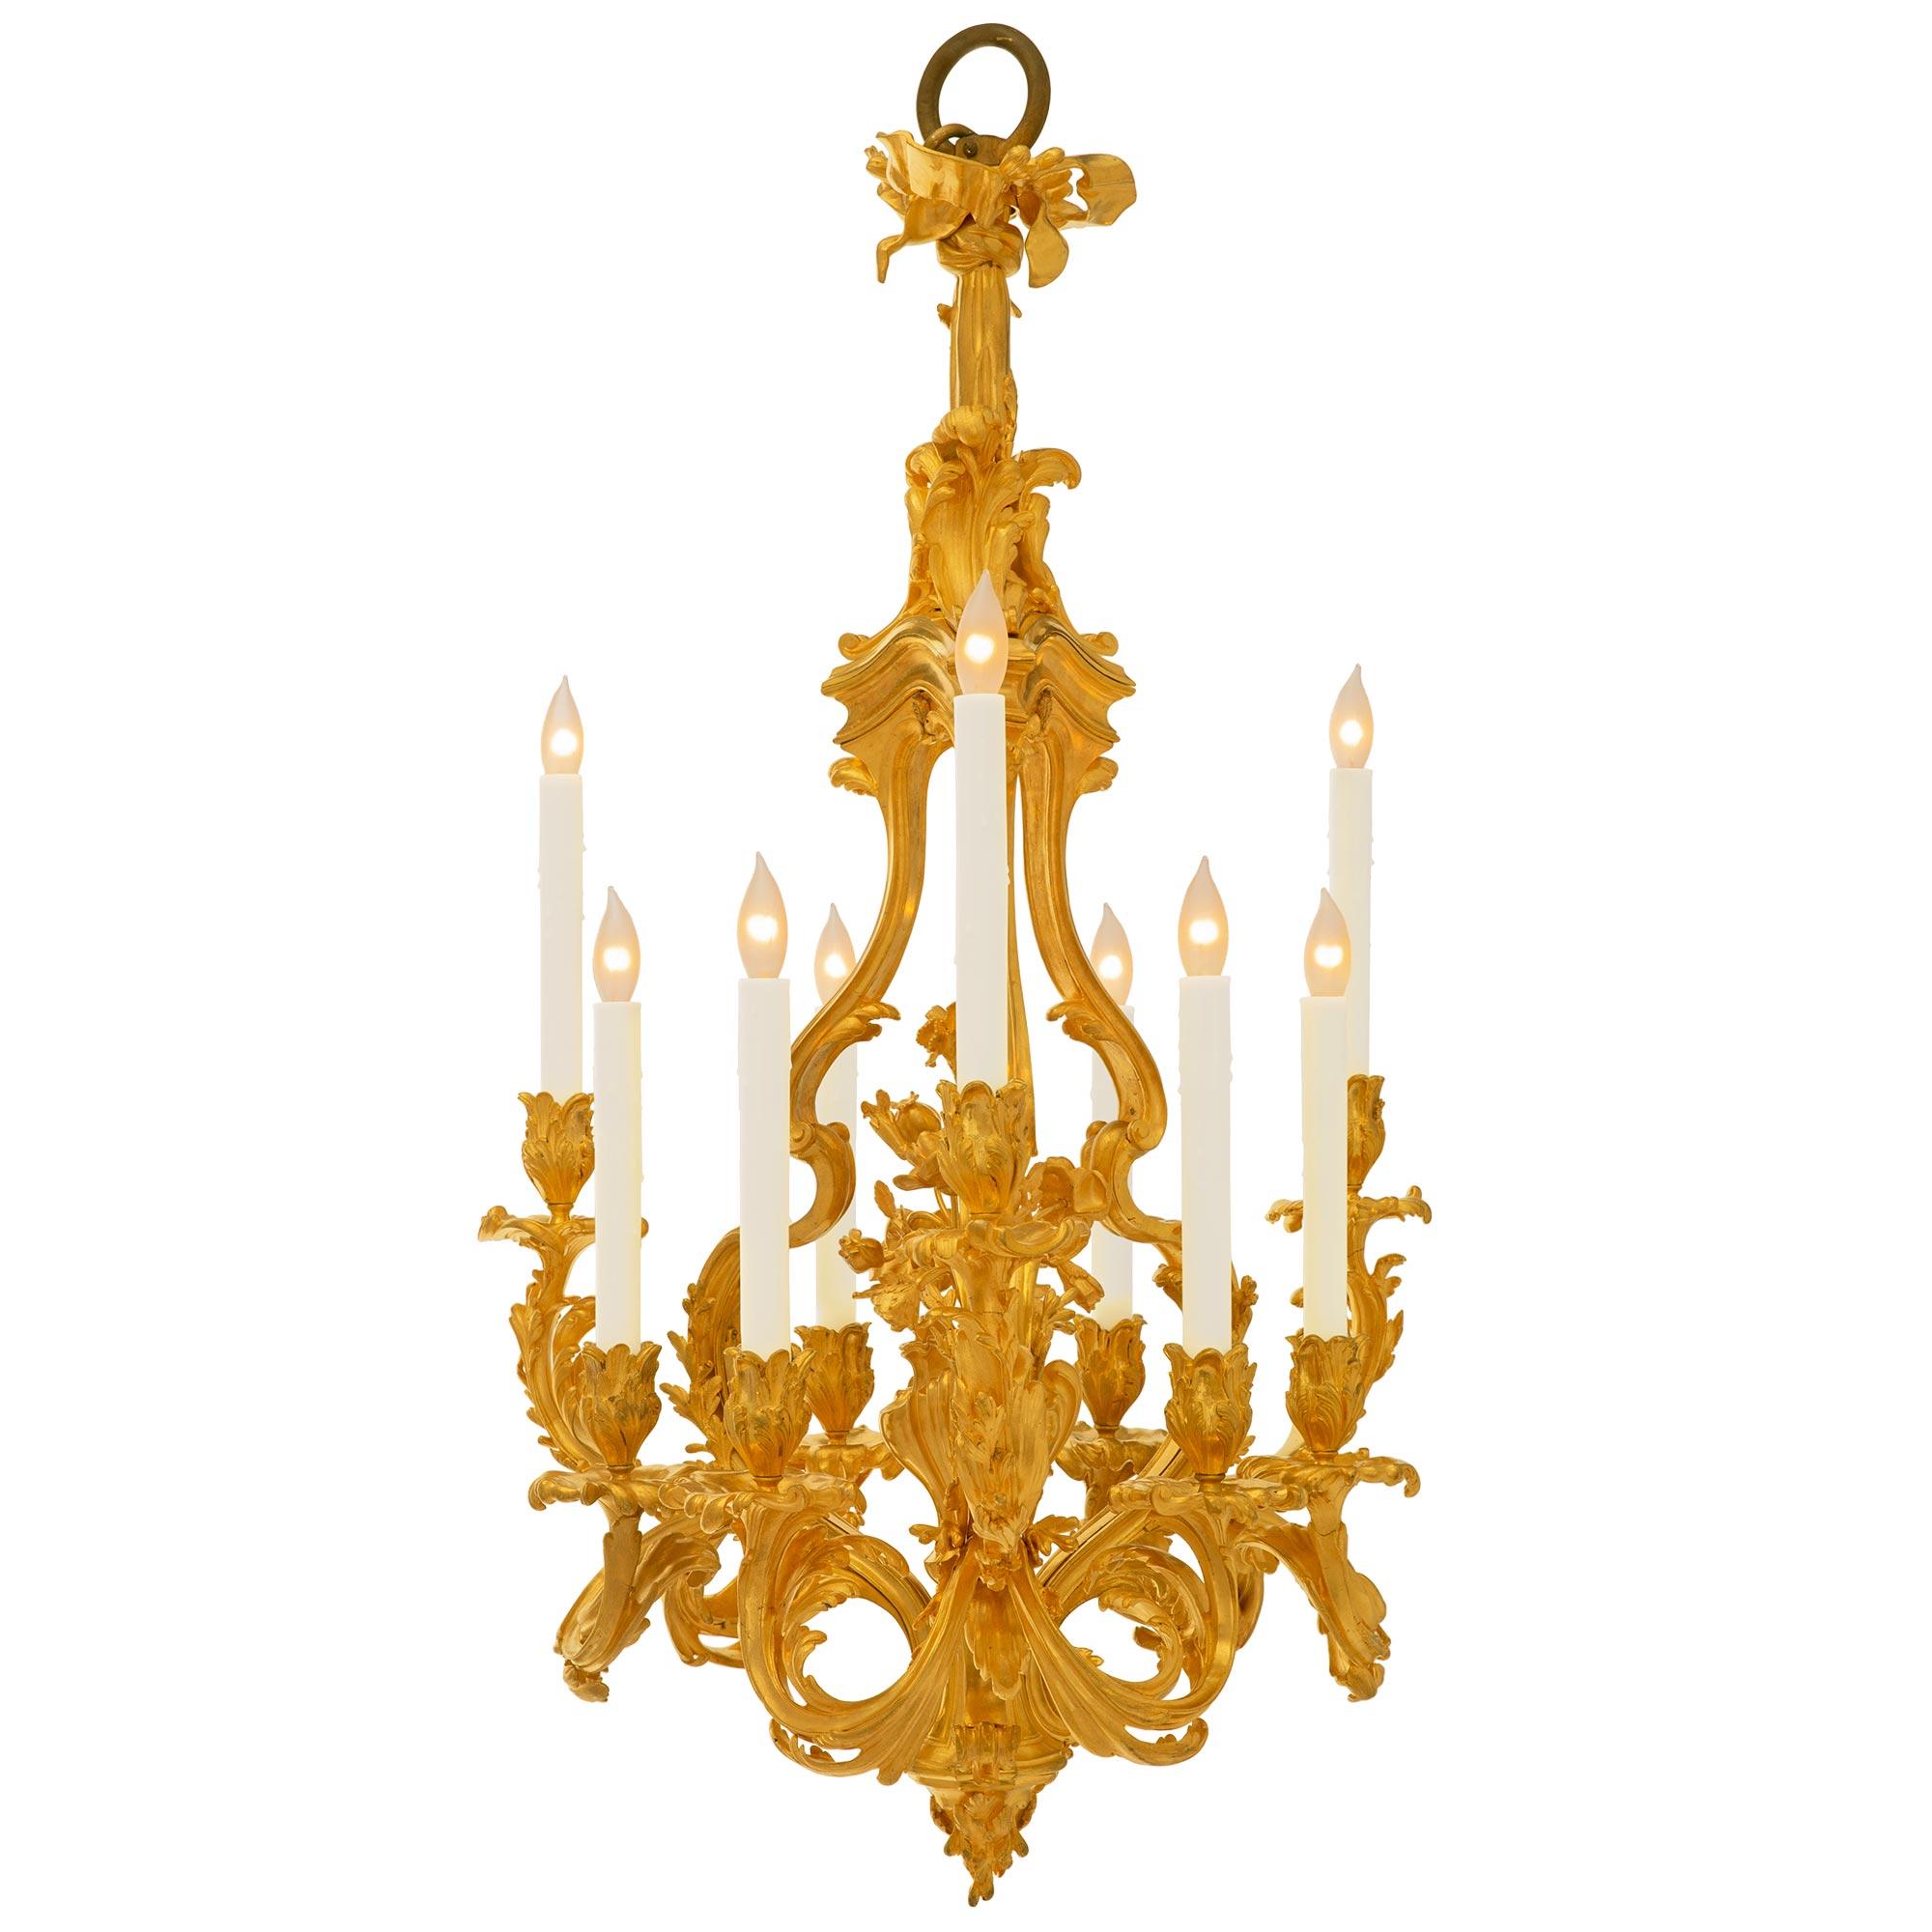 A stunning and extremely decorative French 19th century Louis XV st. ormolu chandelier after a model by Caffieri and attributed to Vian. The nine arm chandelier is centered by a striking bottom foliate finial below the beautiful wonderfully executed